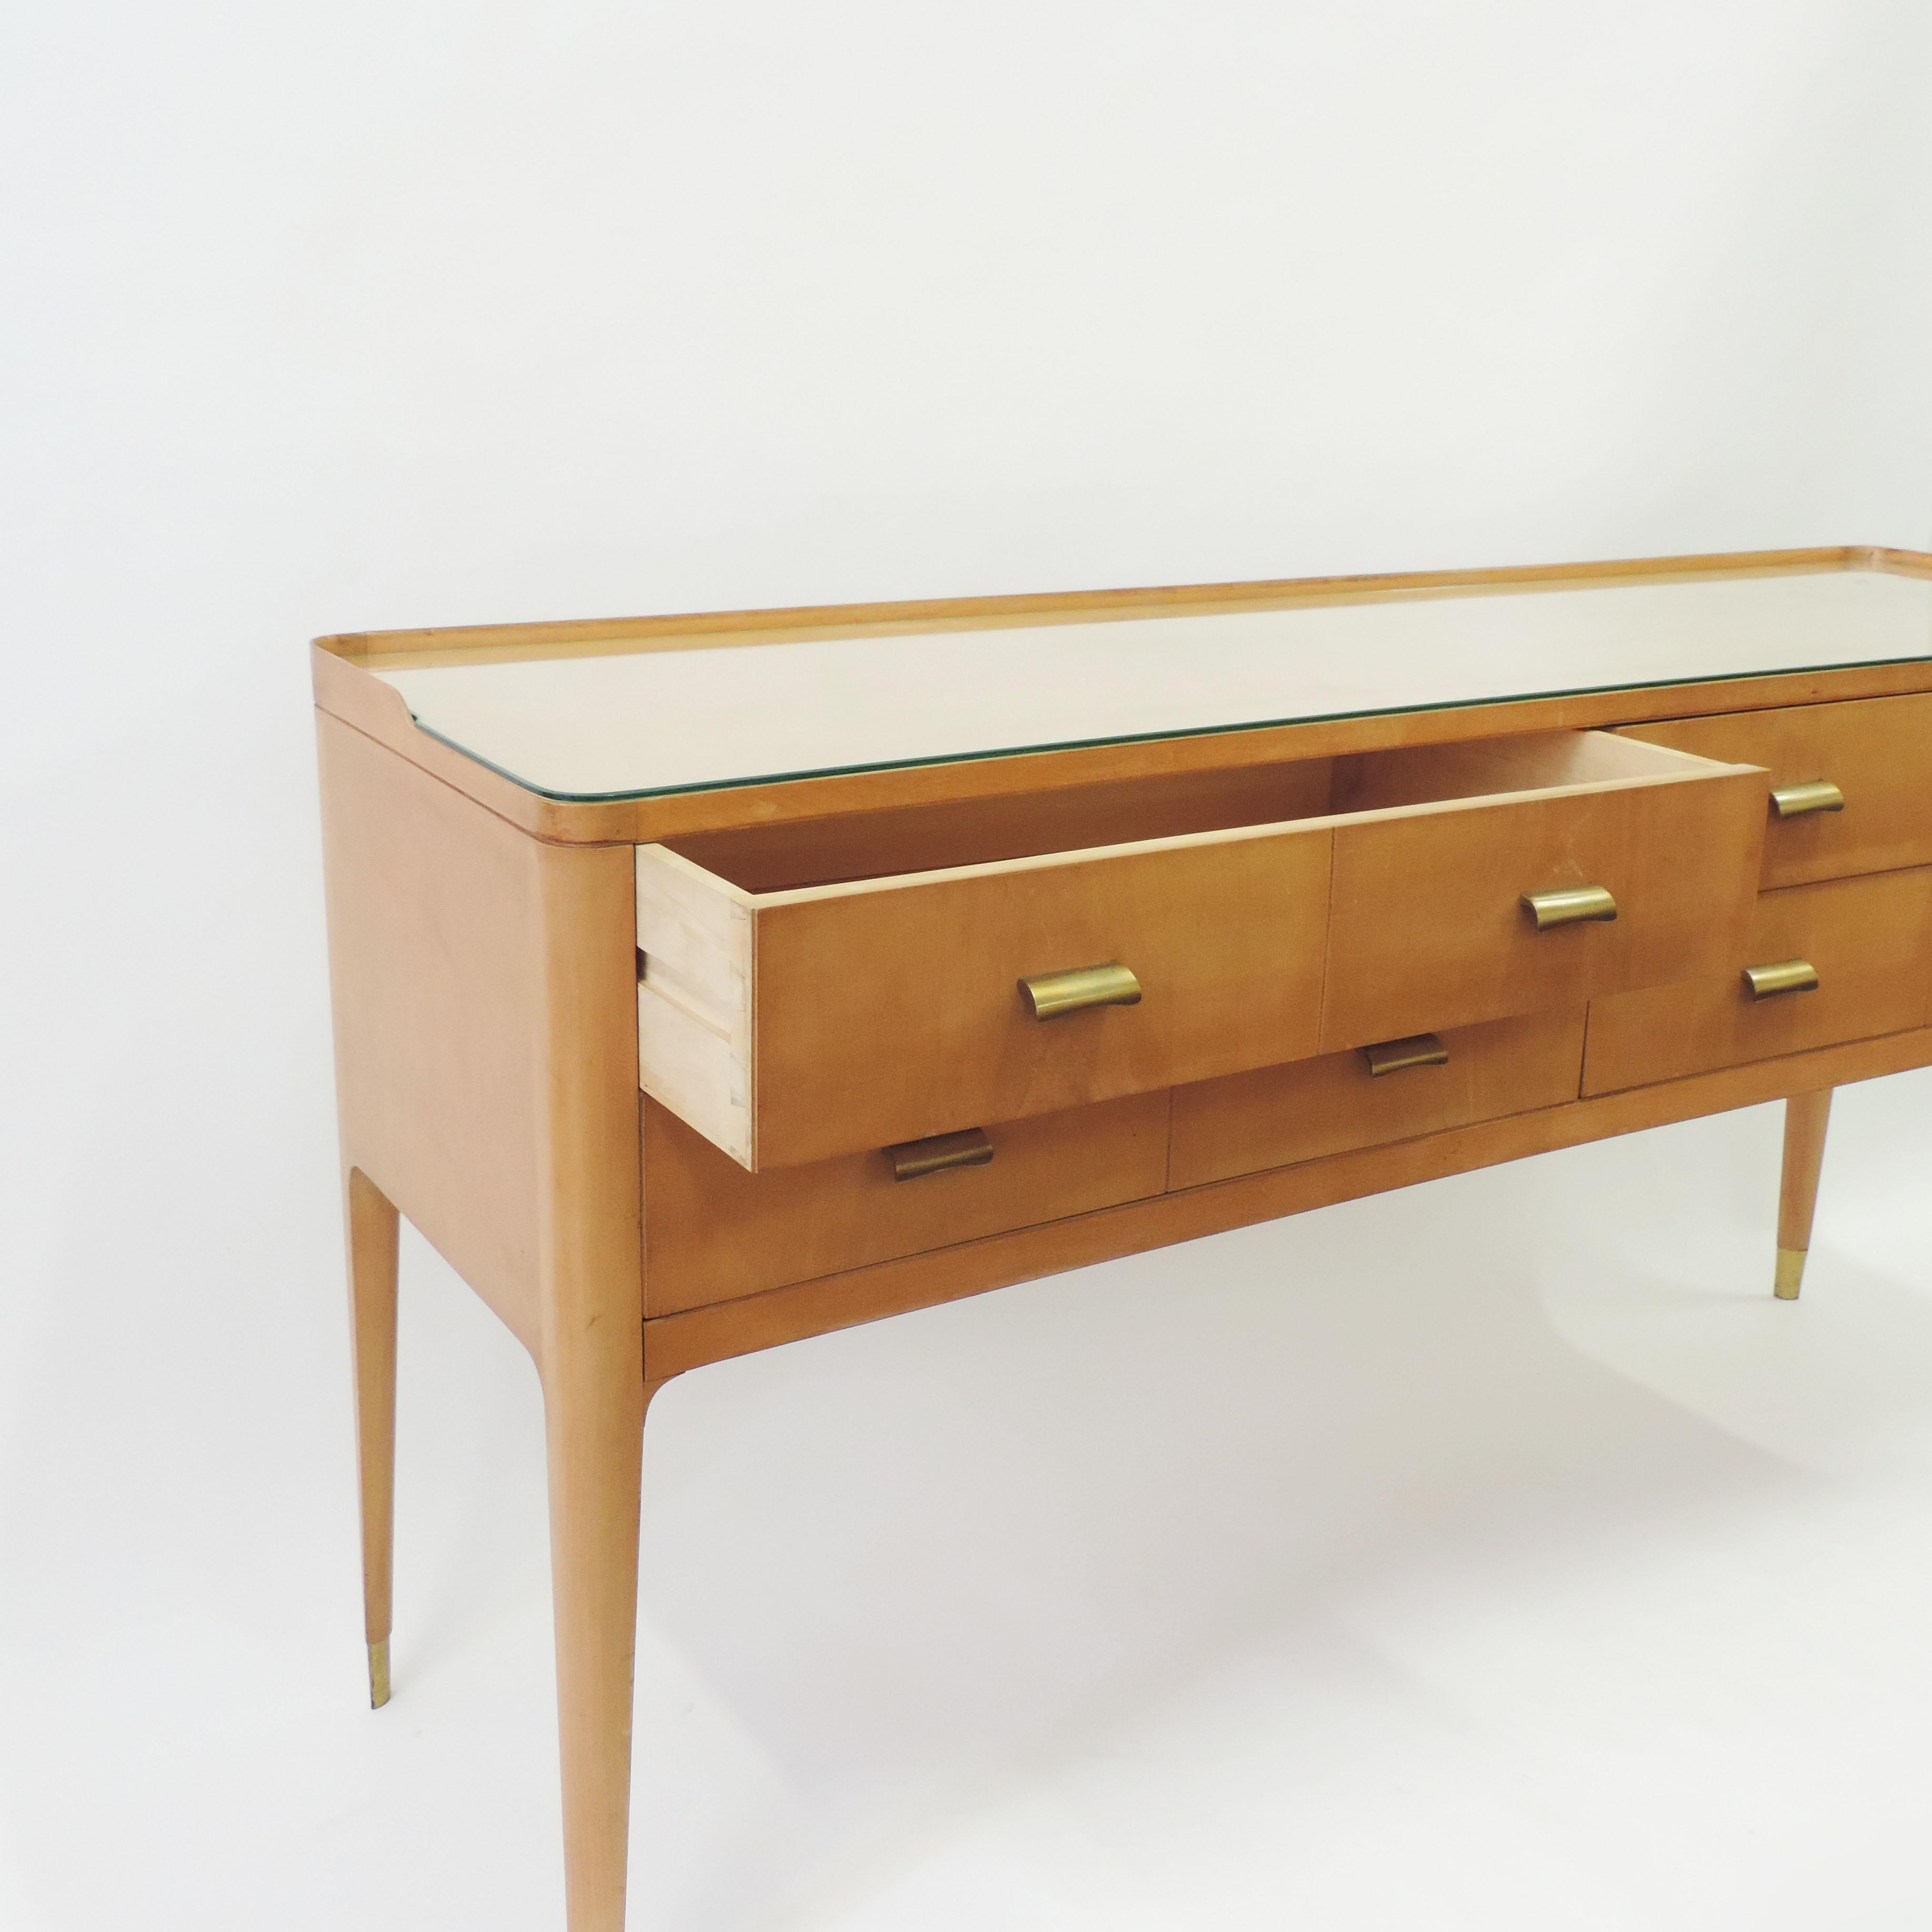 Italian 1950s Curved Wooden Sideboard with Brass Handles 4